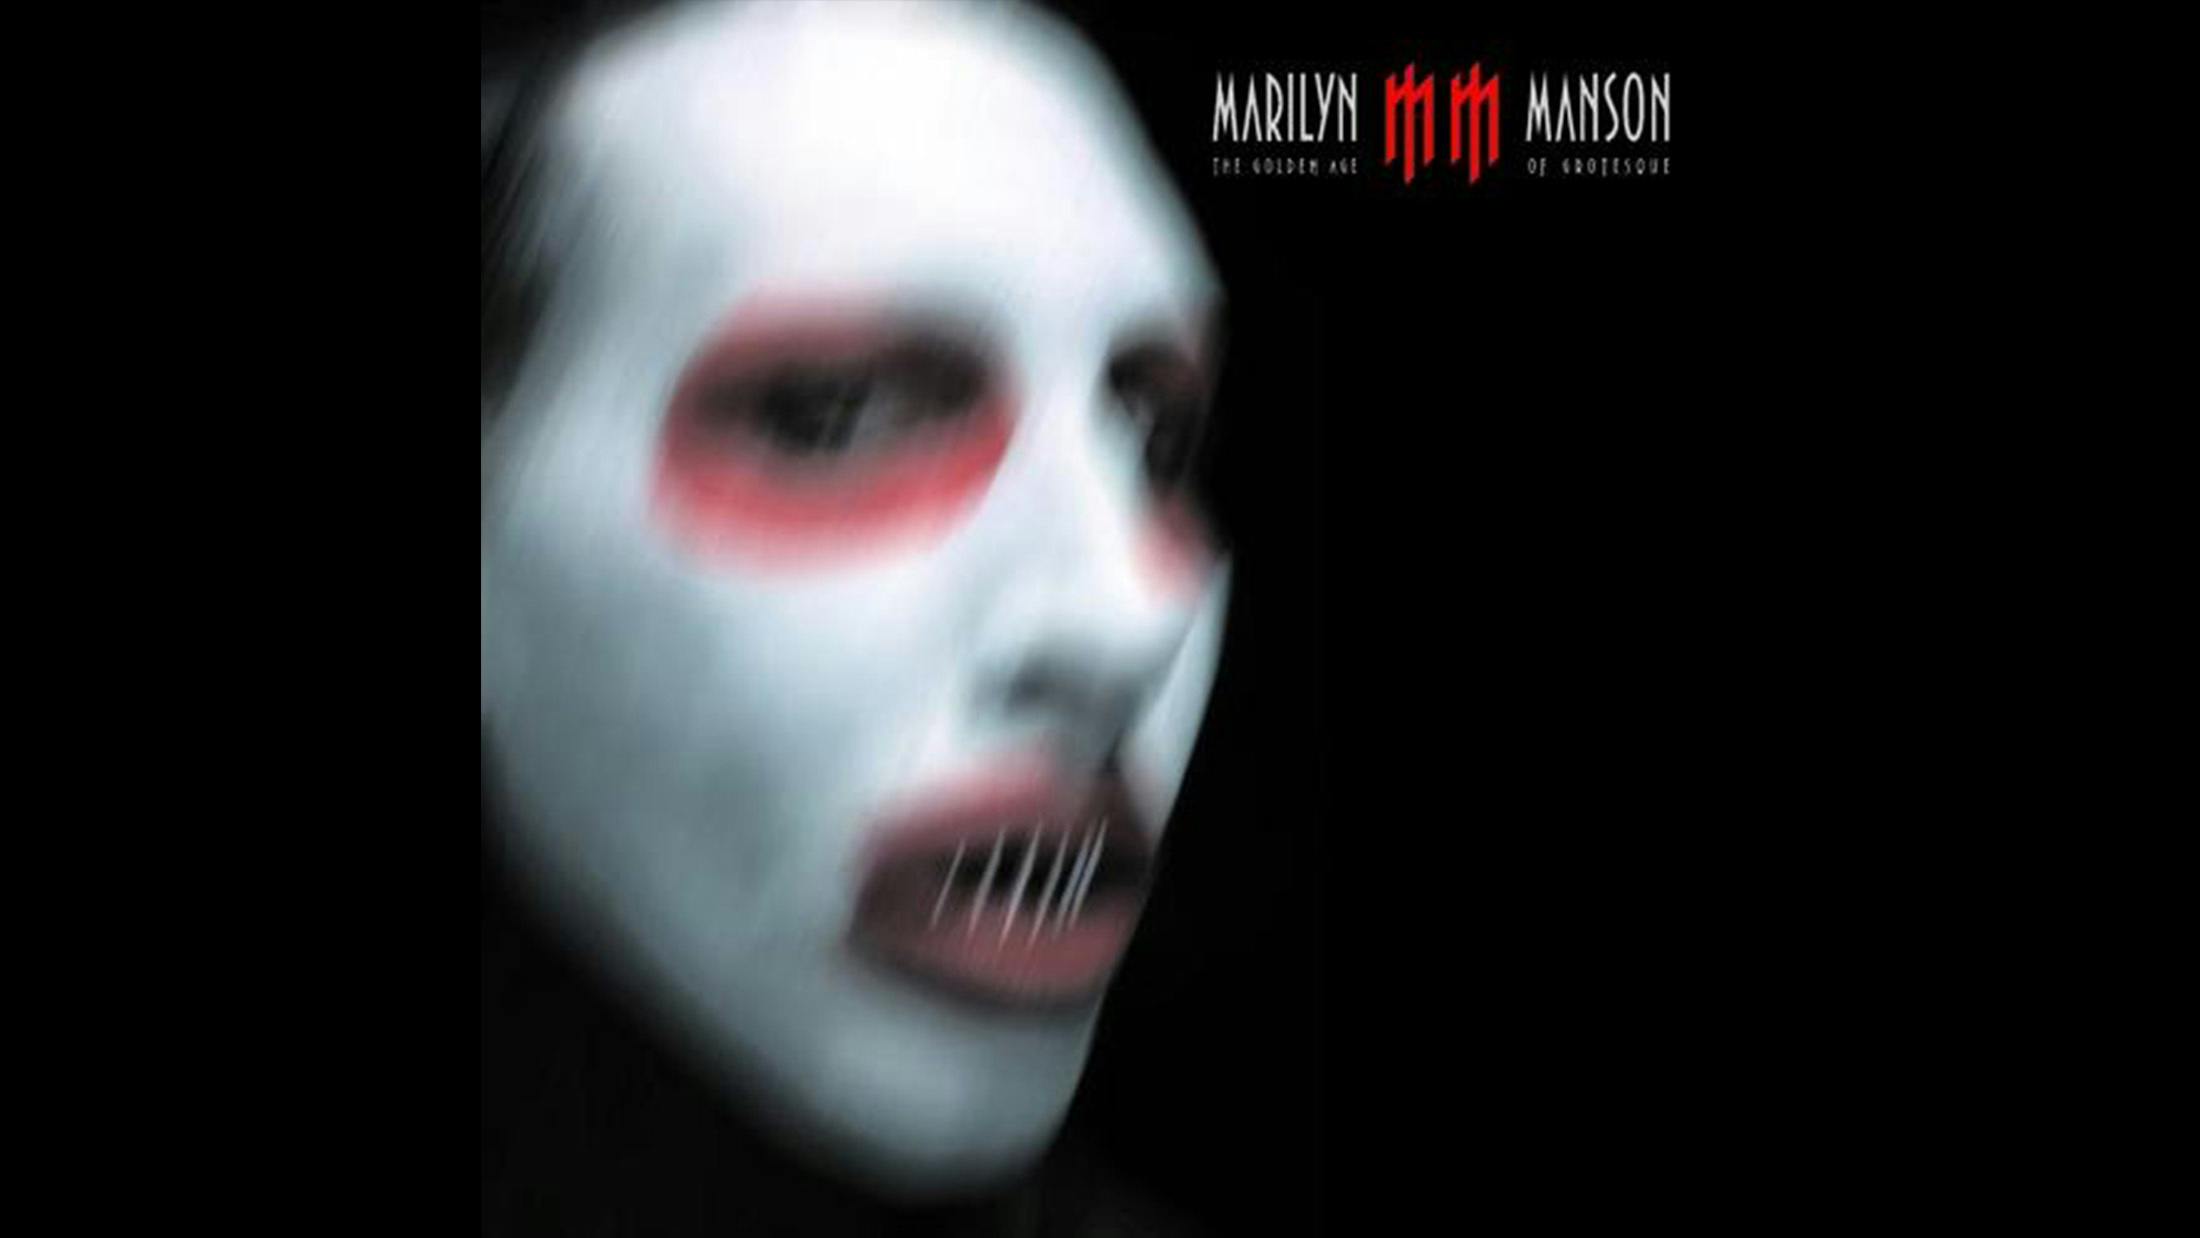 Manson’s stylish, slick fifth album, partially inspired by burlesque, cabaret and vaudeville shows in 1920s Berlin. “This album is a snapshot of my favourite transition in life. It was while I was married and it was a very creative time for me. It was a time when I felt that I didn’t have to define myself simply by music – I had my first art show around this time – but I felt like I could be truly me.”